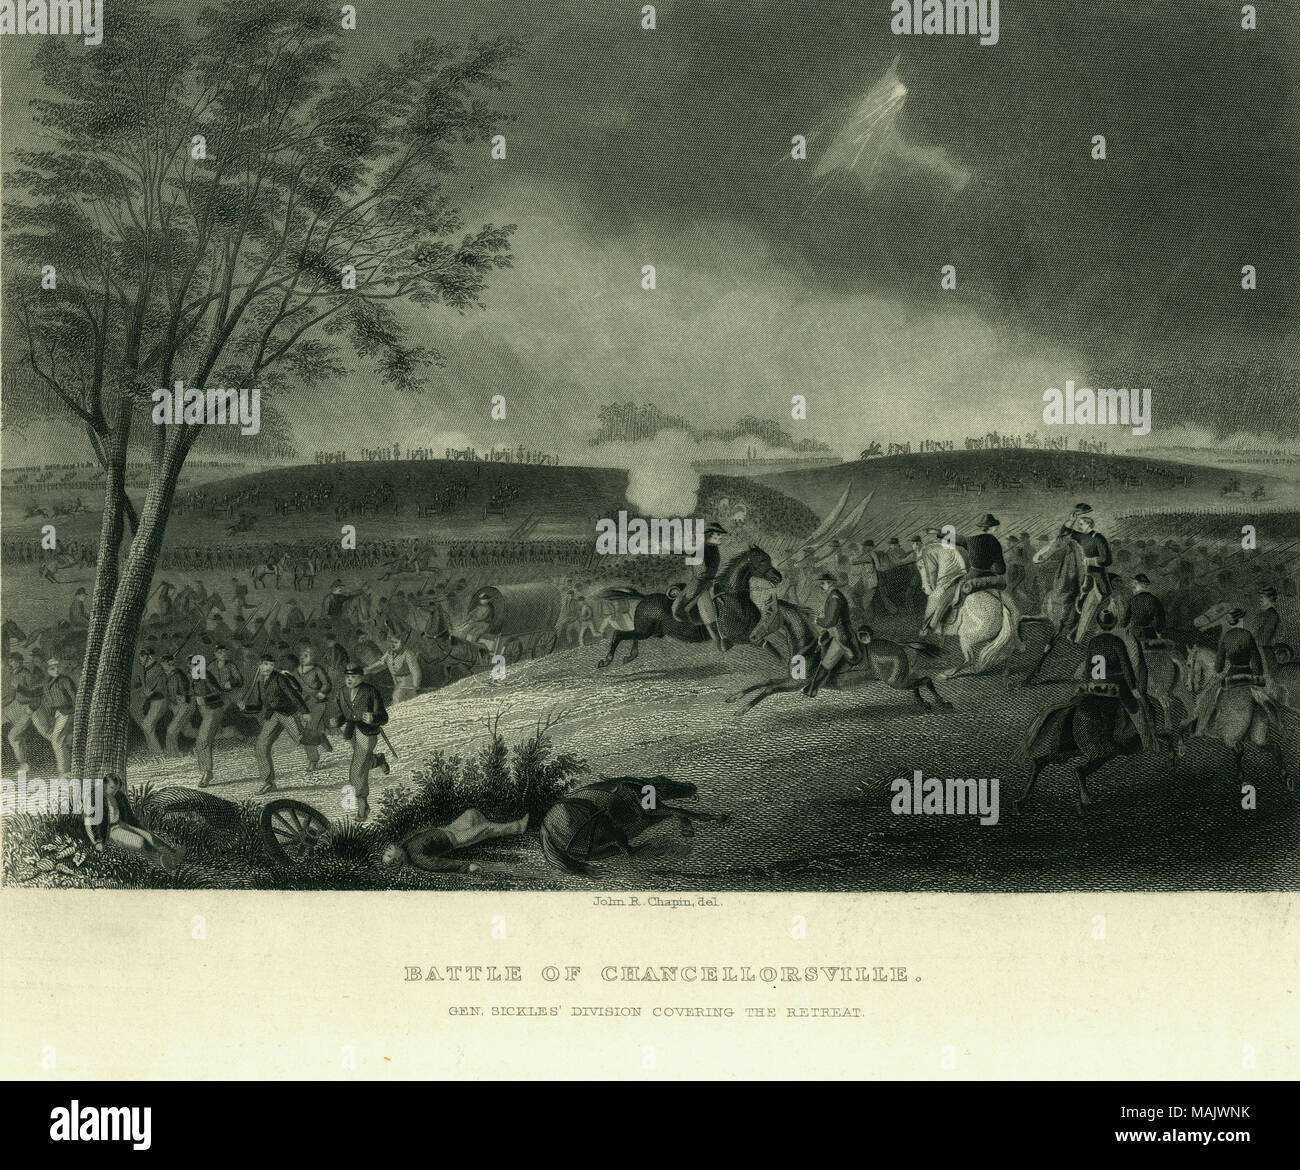 Print of troops and one wagon retreating on left side of image with eight men on horses on the right side of image. Behind the riders is another large group of soldiers. There is a multitude of soldiers in the background with several cannons and crewmembers on a ridge. 'BATTLE OF CHANCELLORSVILLE. GEN. SICKLES' DIVISION COVERING THE RETREAT.' (printed below image). 'From: The Great Civil War. Vol. III By Robt. Towes, M. D. and Benjamin G. Smith Pub. by Virtue [?] and Yorston [?], 1865' (written on reverse side). Title: 'Battle of Chancellorsville. Gen. Sickles' Division Covering the Retreat.'  Stock Photo